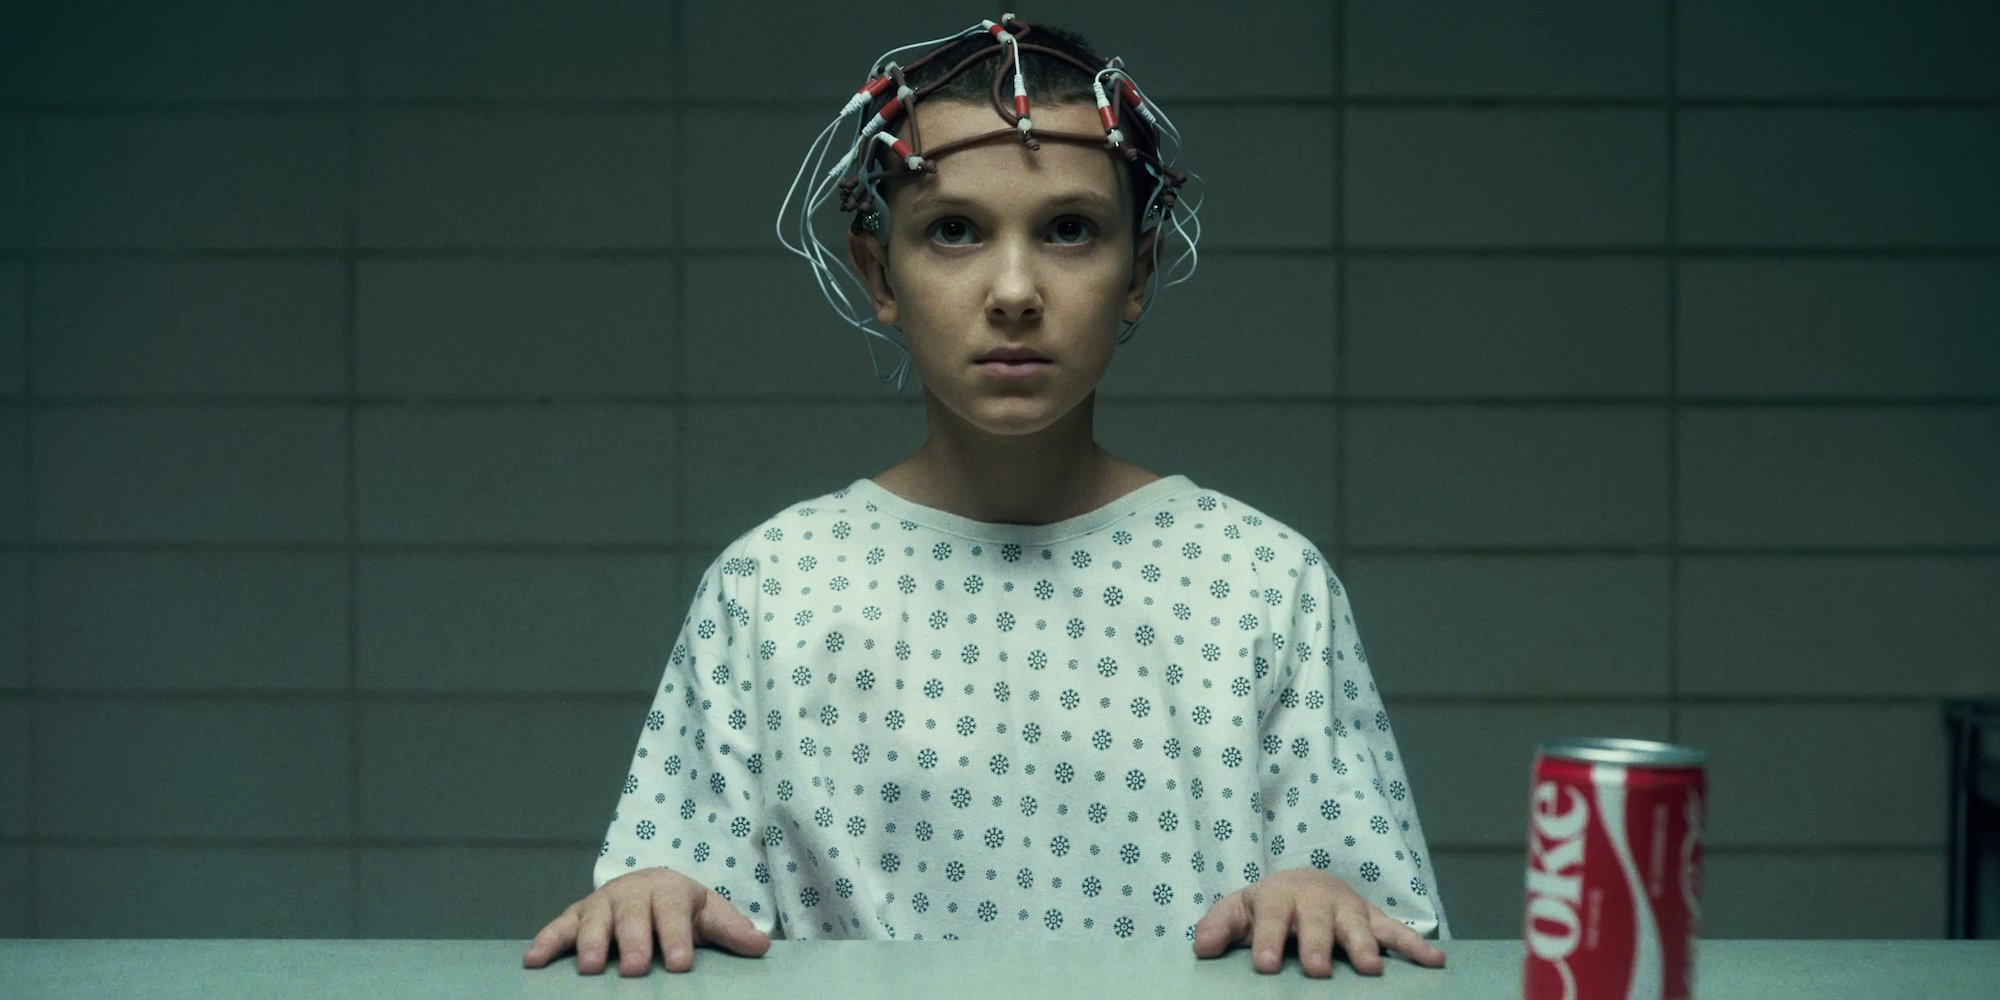 'Stranger Things' star Millie Bobby Brown as Eleven in a production still from season 1 with wires attached to her head while wearing a hospital gown